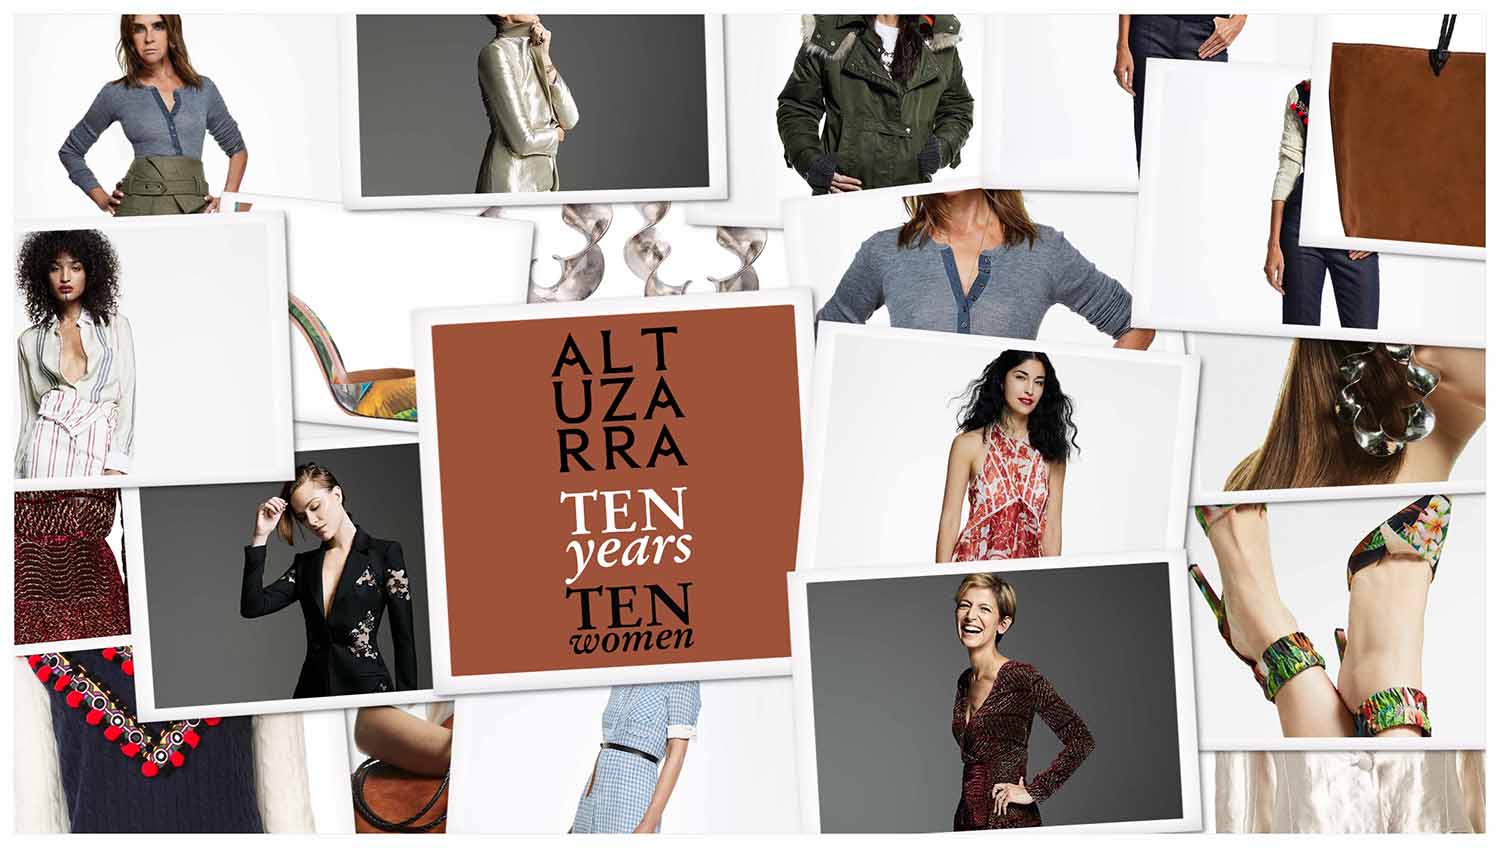 Altuzarra Redefines “The One That Got Away” on its 10th Anniversary Collection